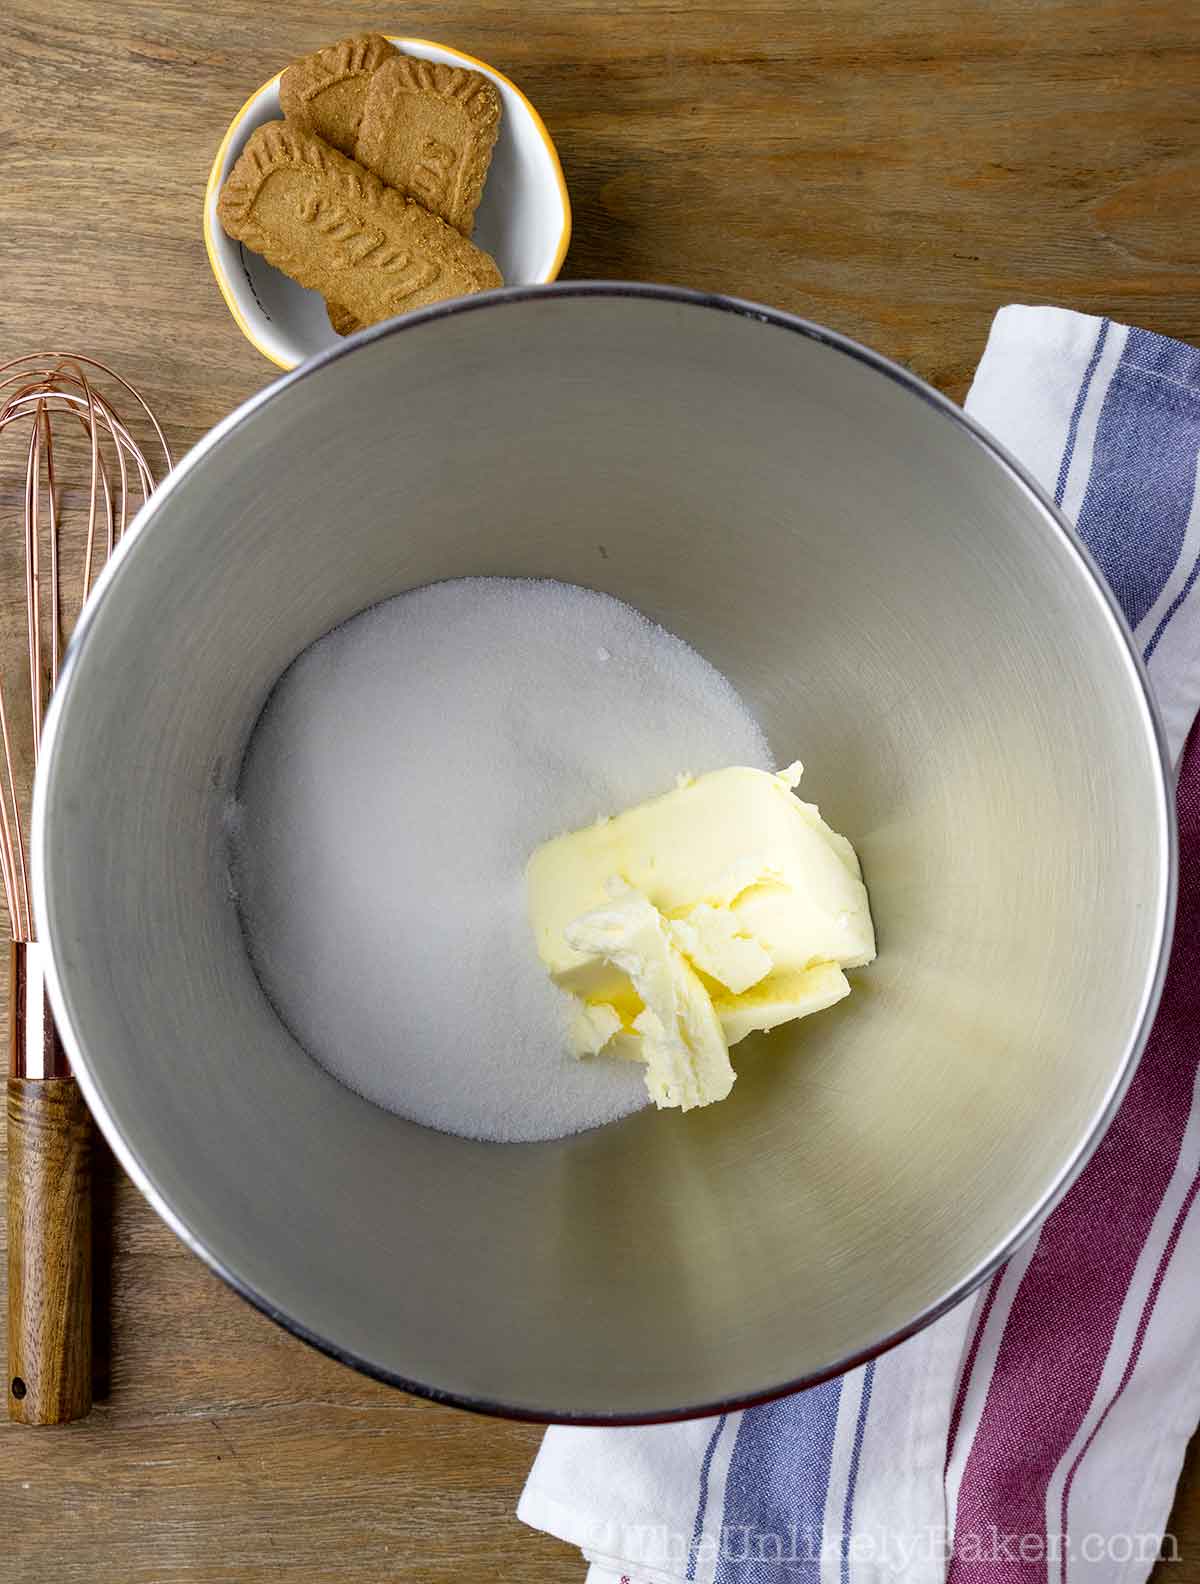 Sugar and butter in a bowl.